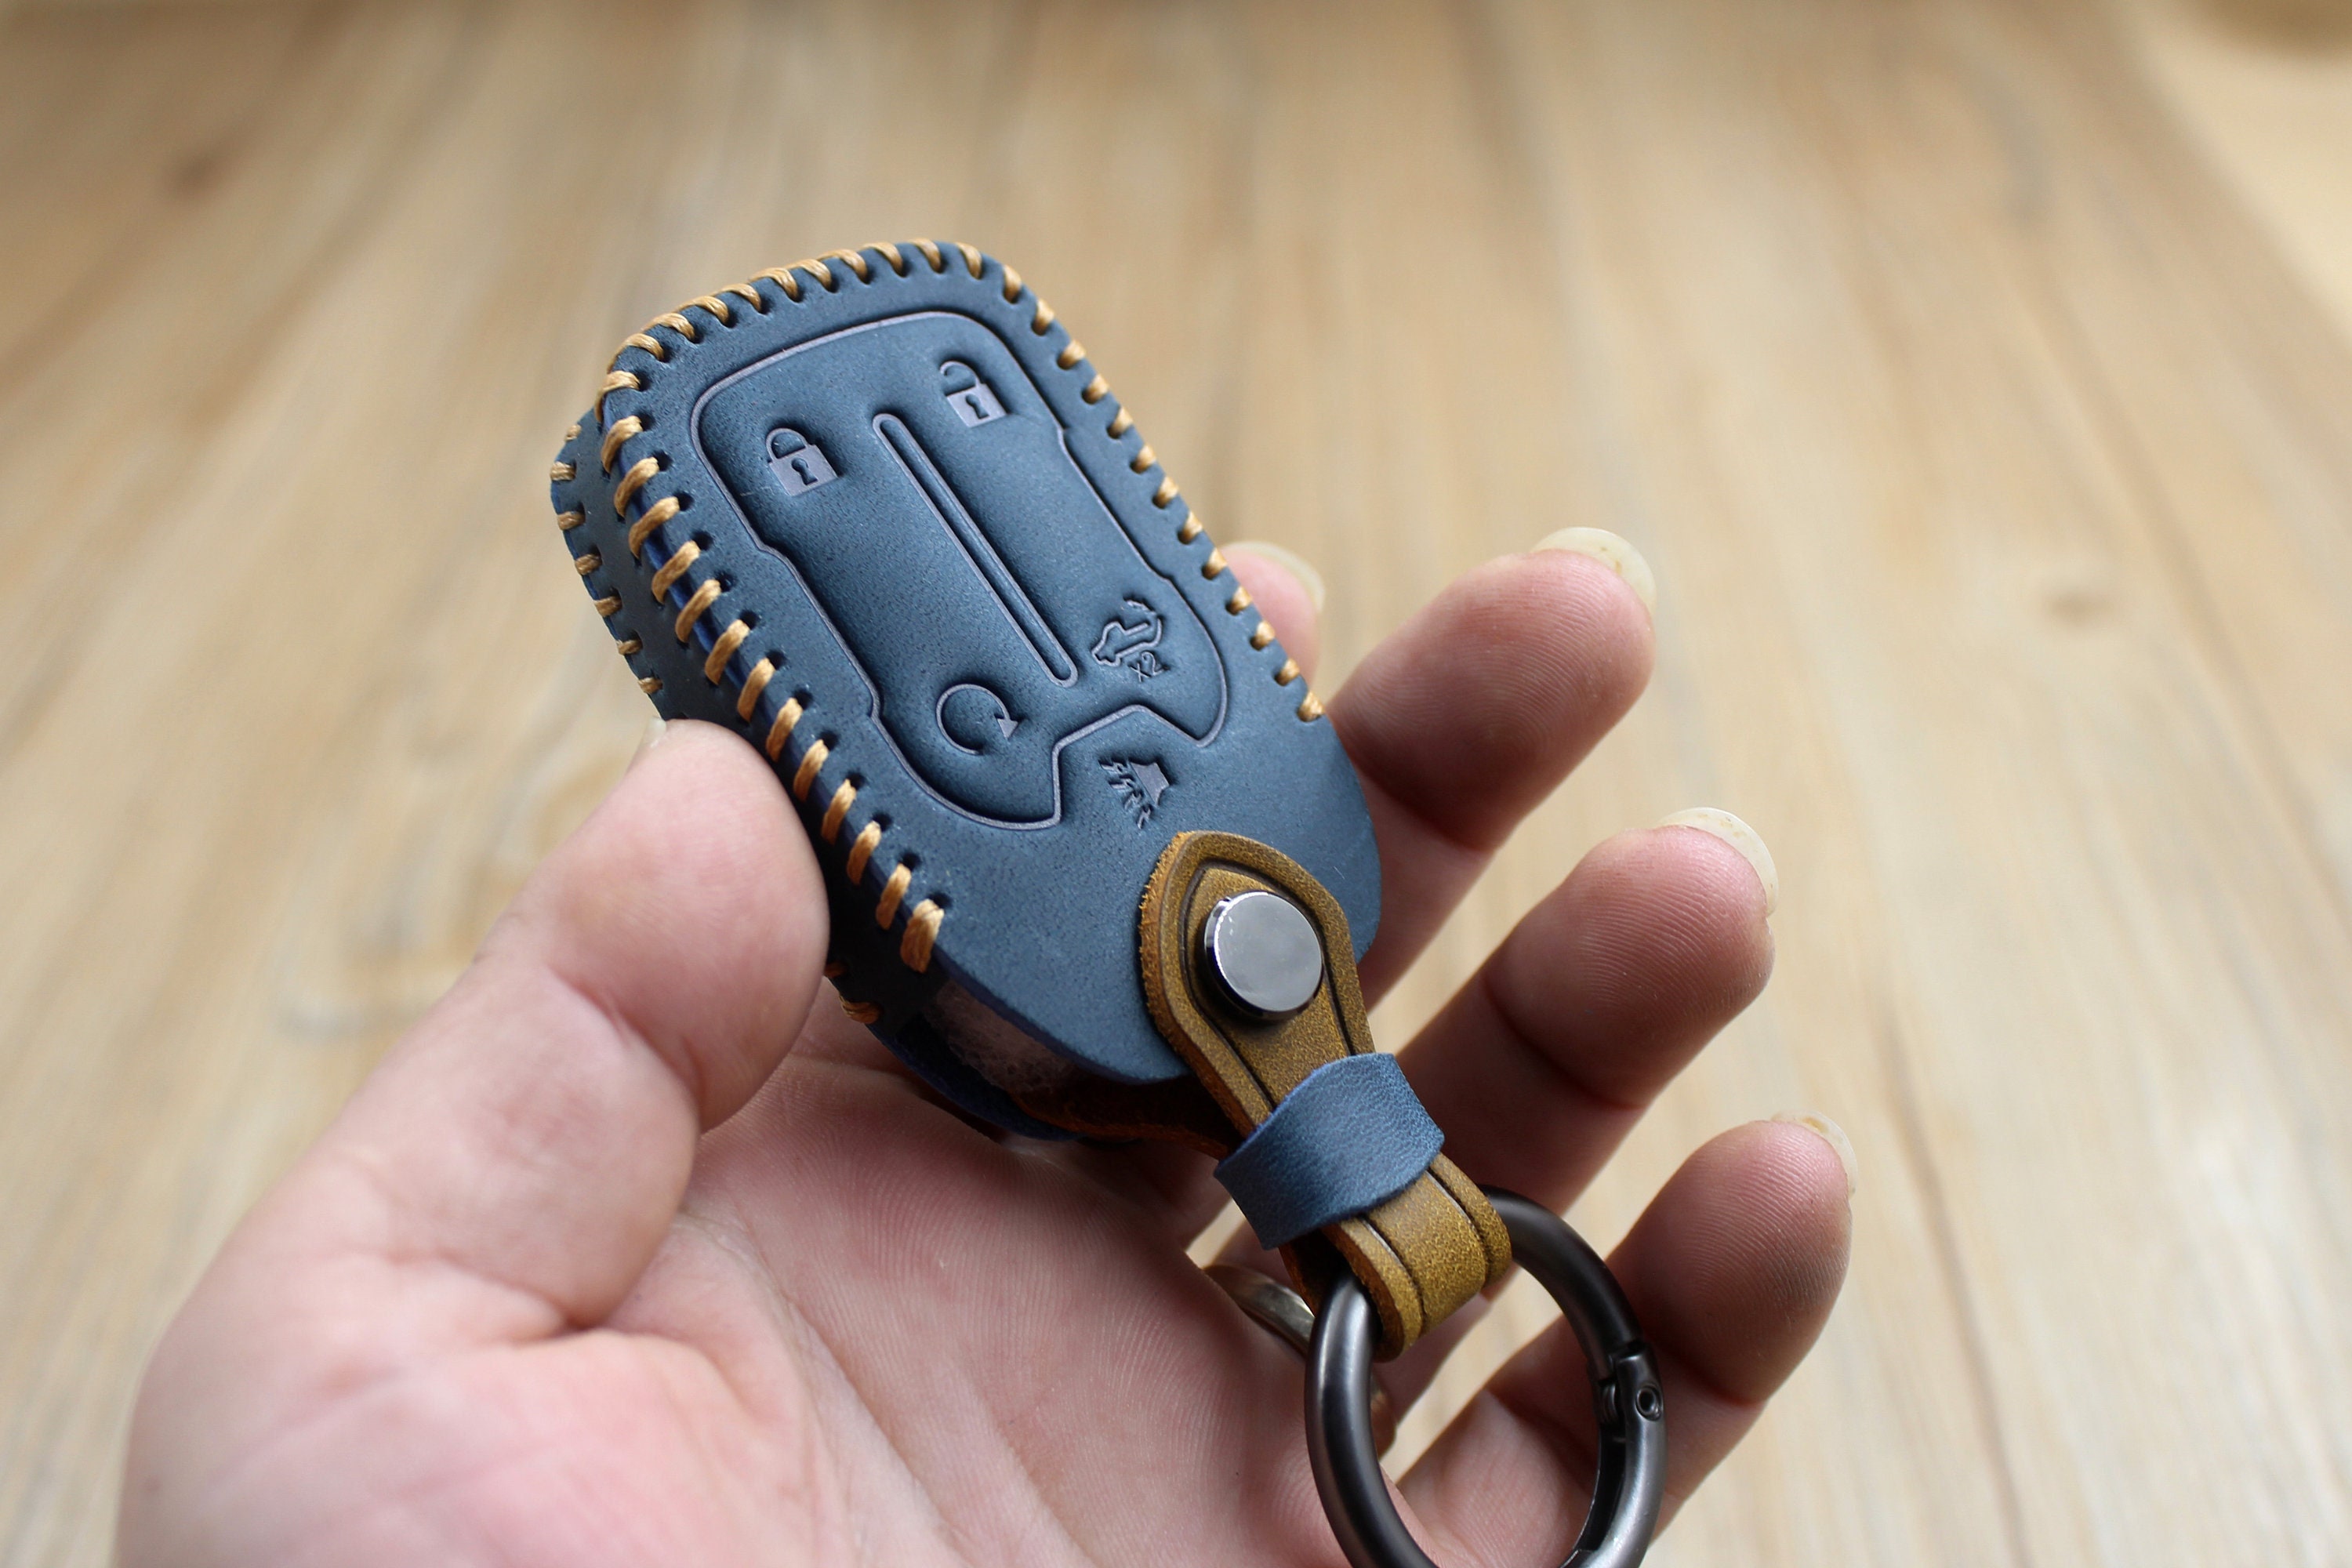 Handmade leather car key cases with name stamping service.(made to order)  Thank you for your support. #Vitmehandcraft #Handmade #Carkeys #Keycase